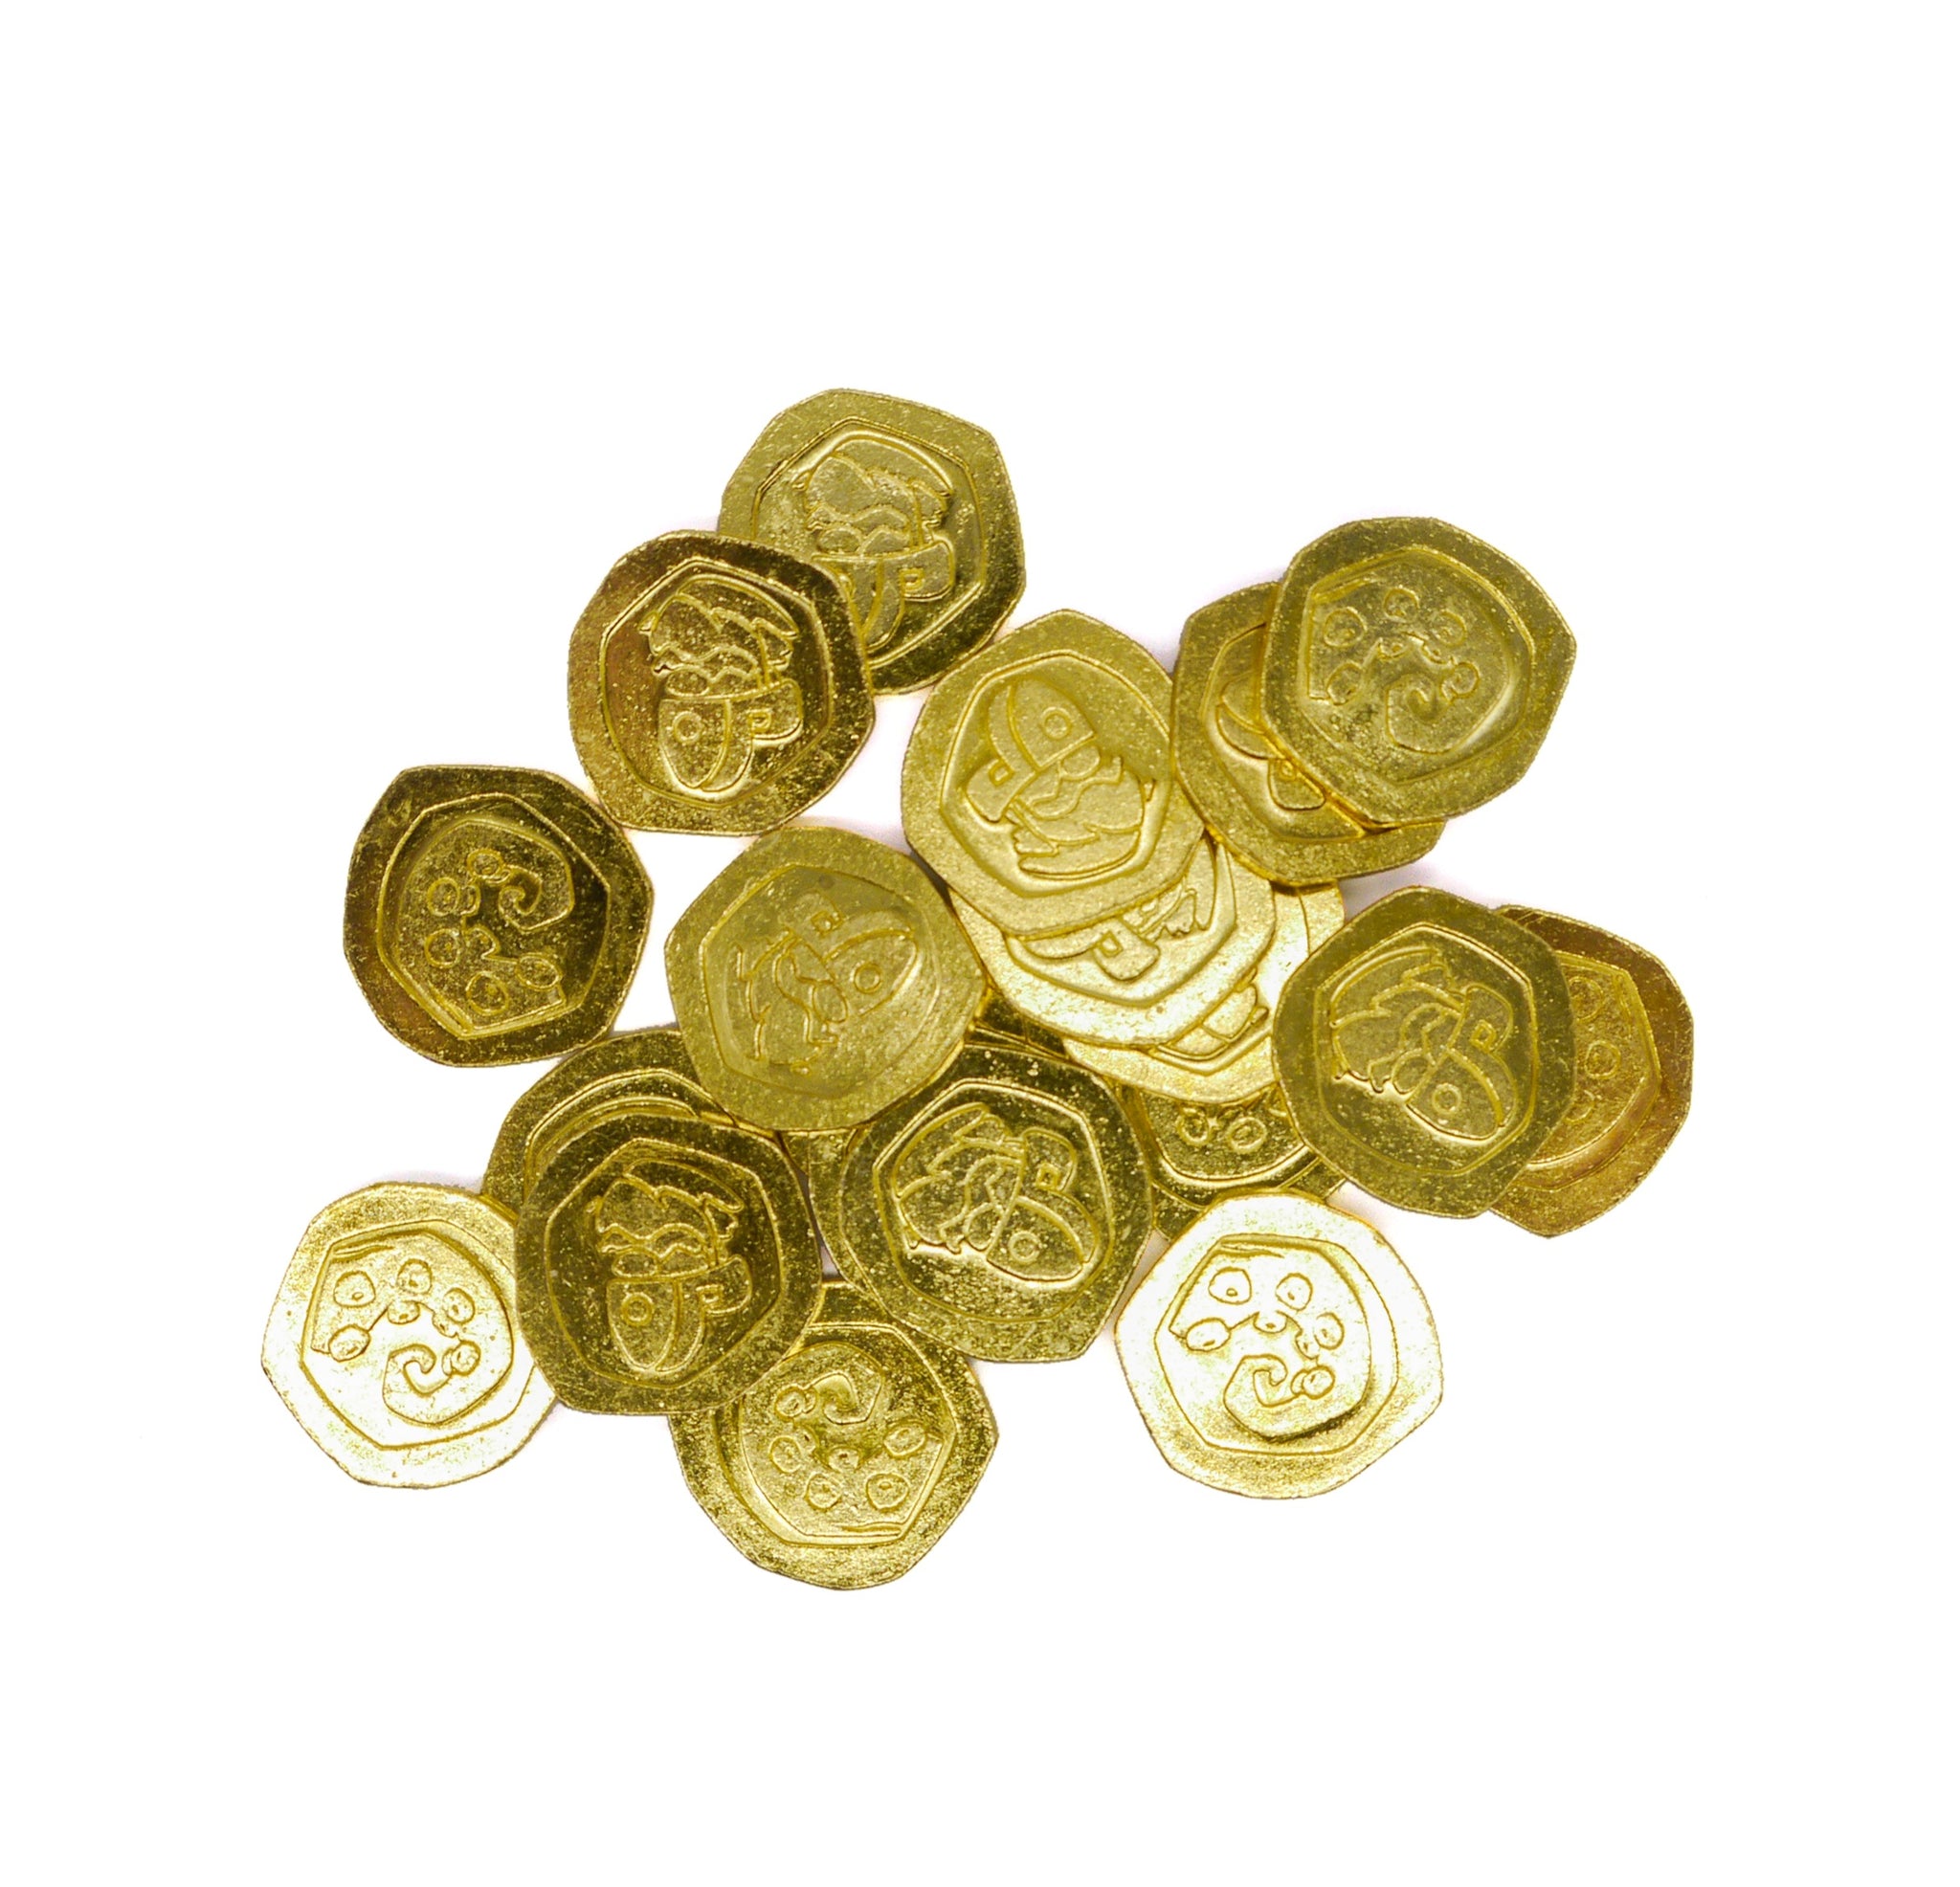 Deluxe Gold Coins